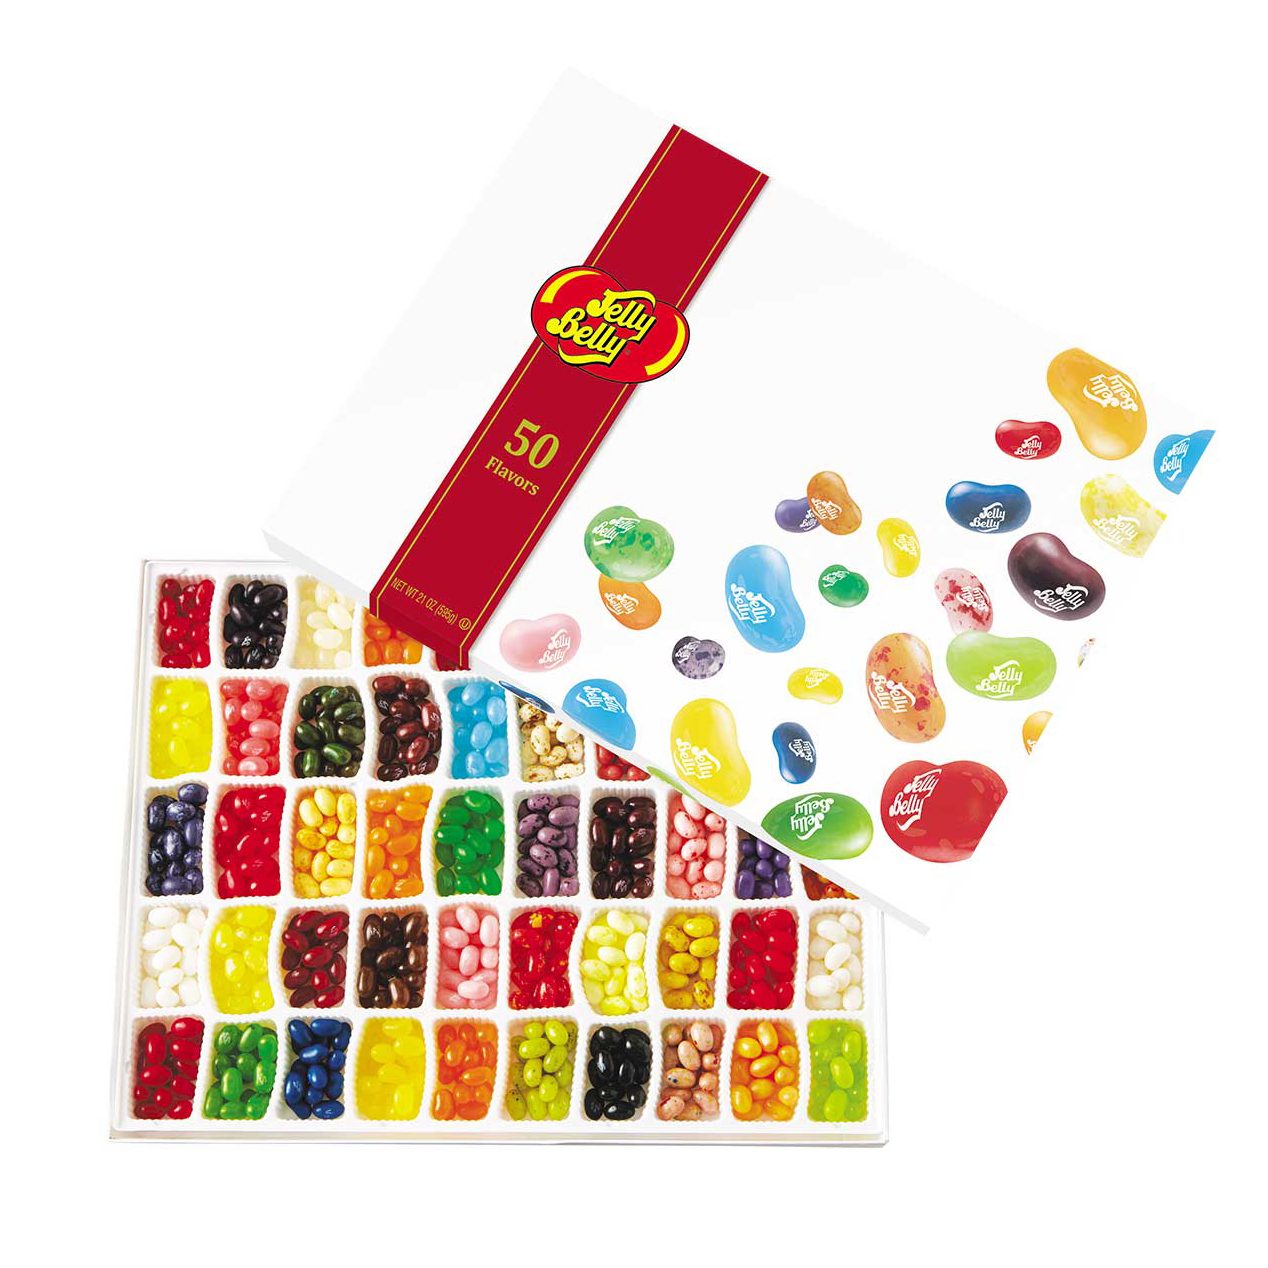 50 Flavors Of Jelly Beans Ecomm